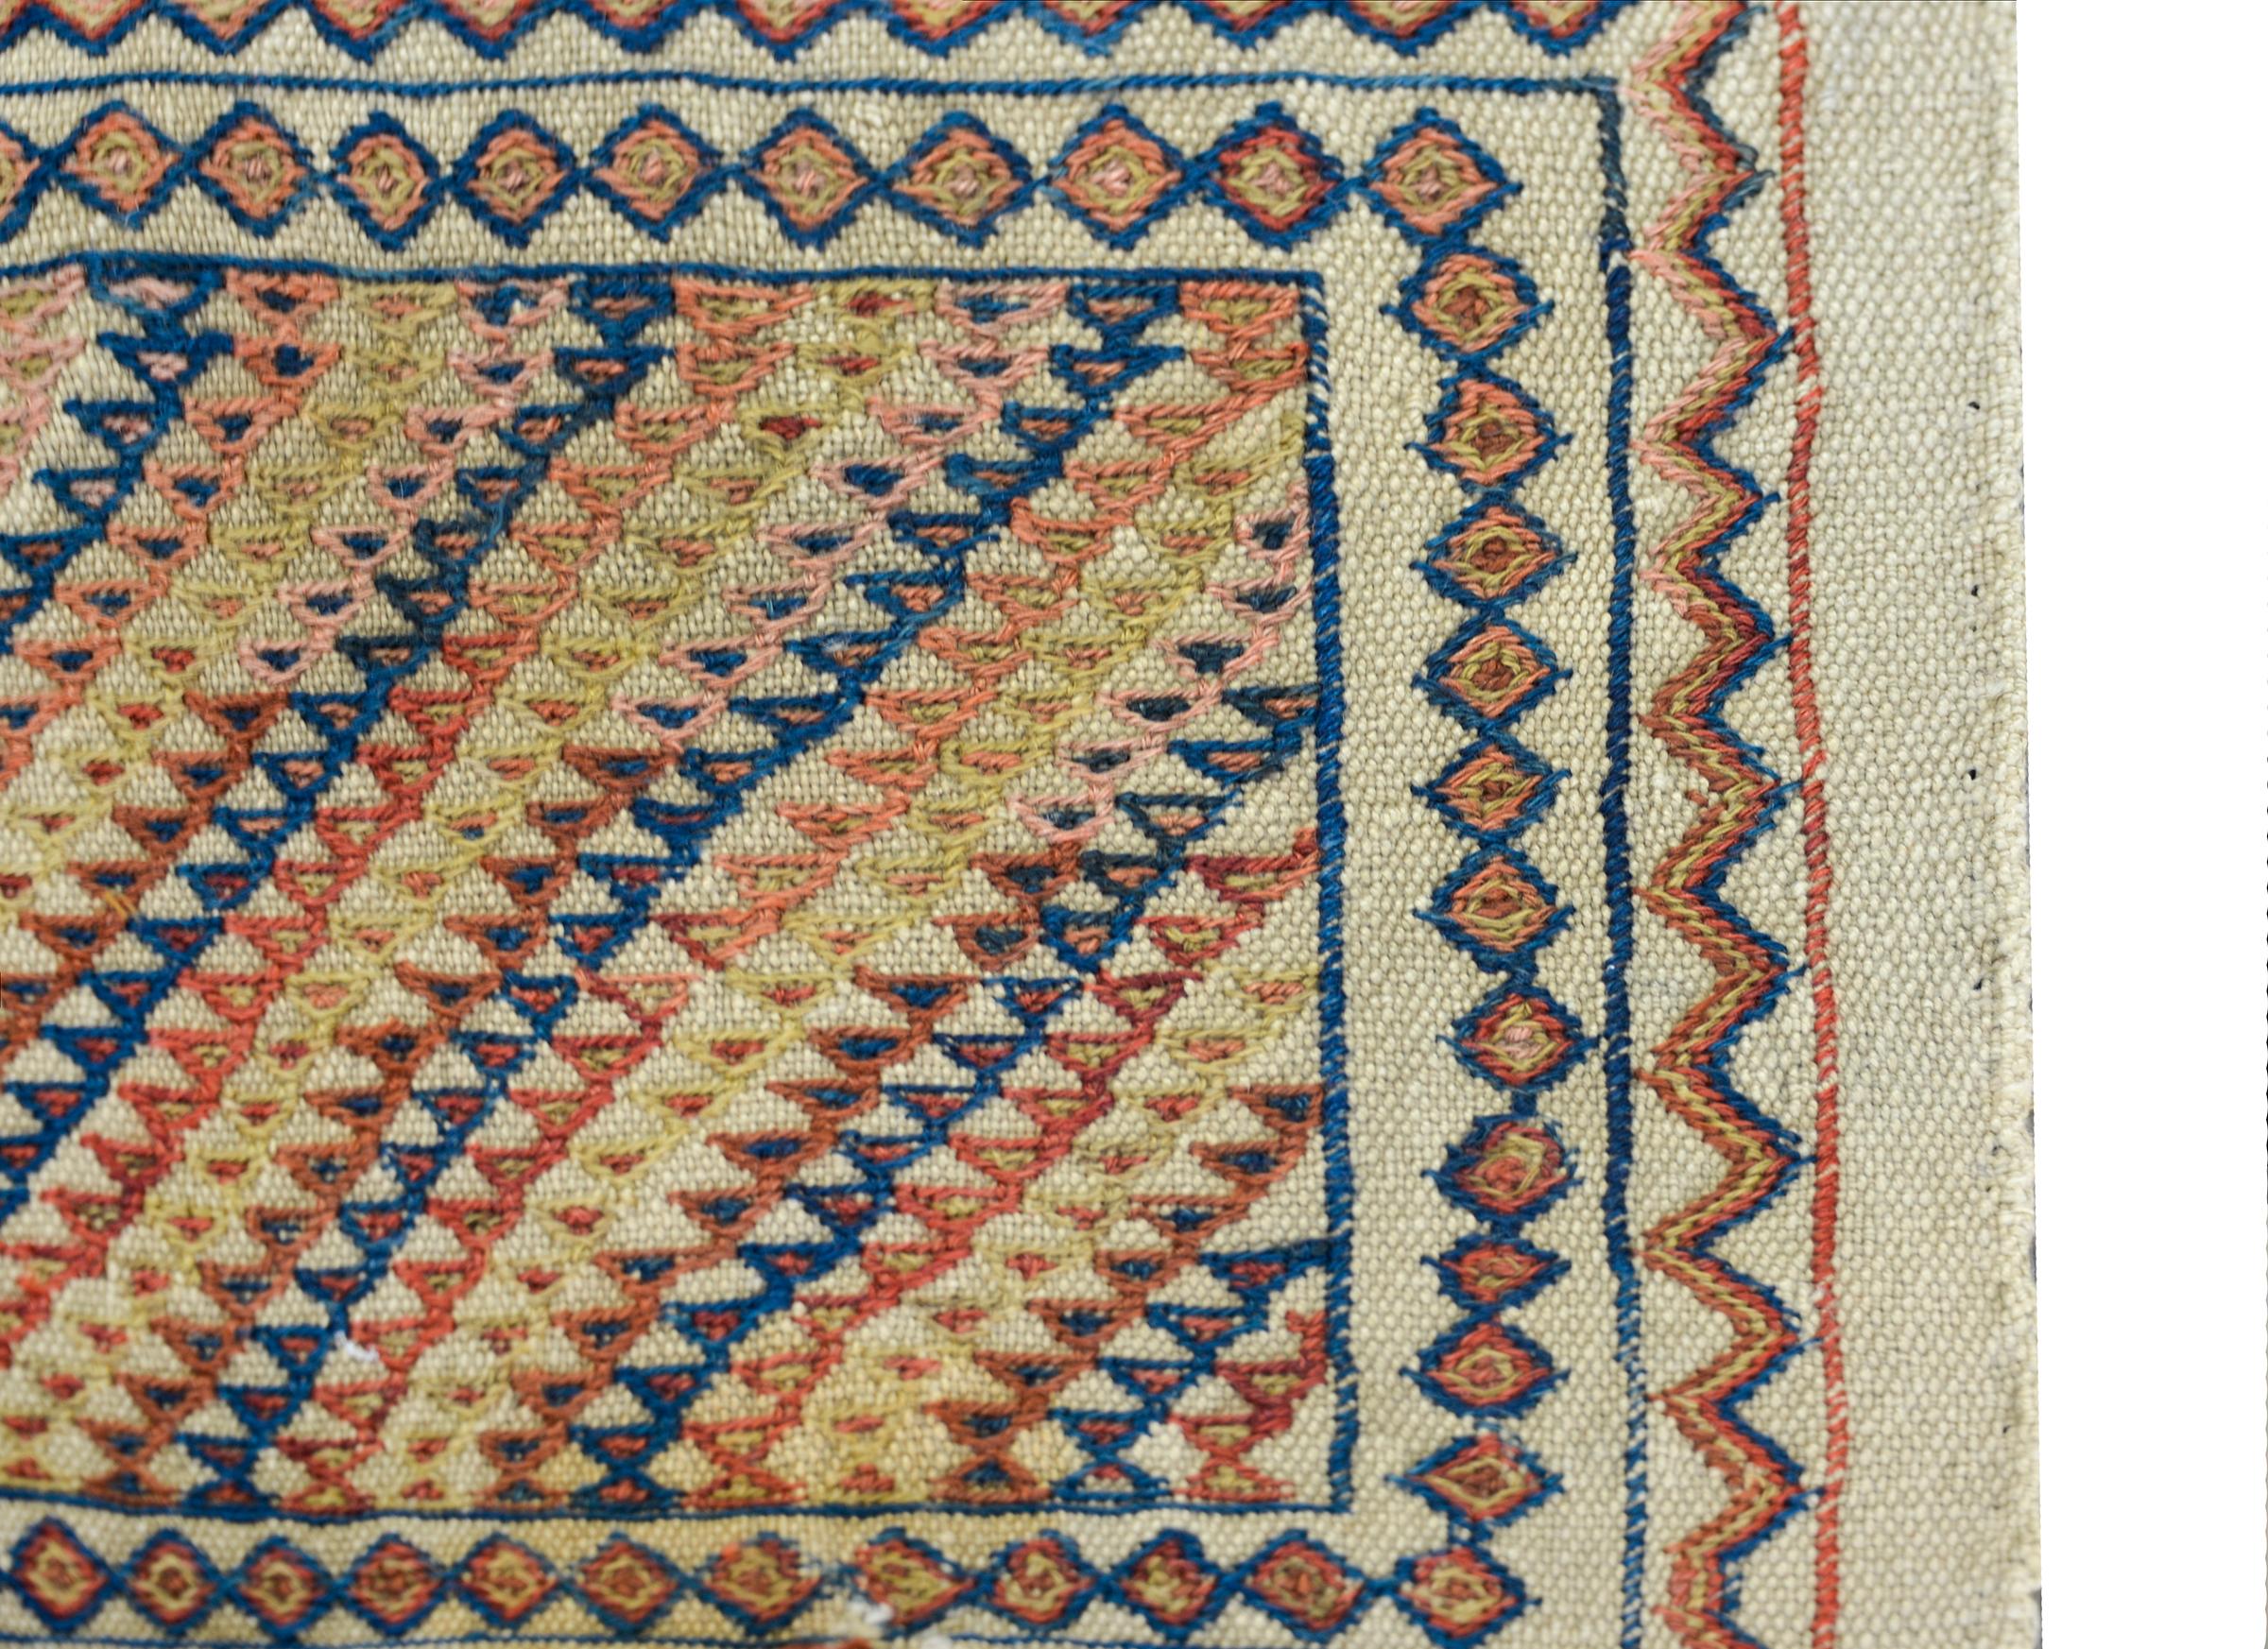 An early 20th century Persian Azari flat hand woven rug with ends embroidered with multi-colored triangle patterned stripes and surrounded by more geometric stripes.